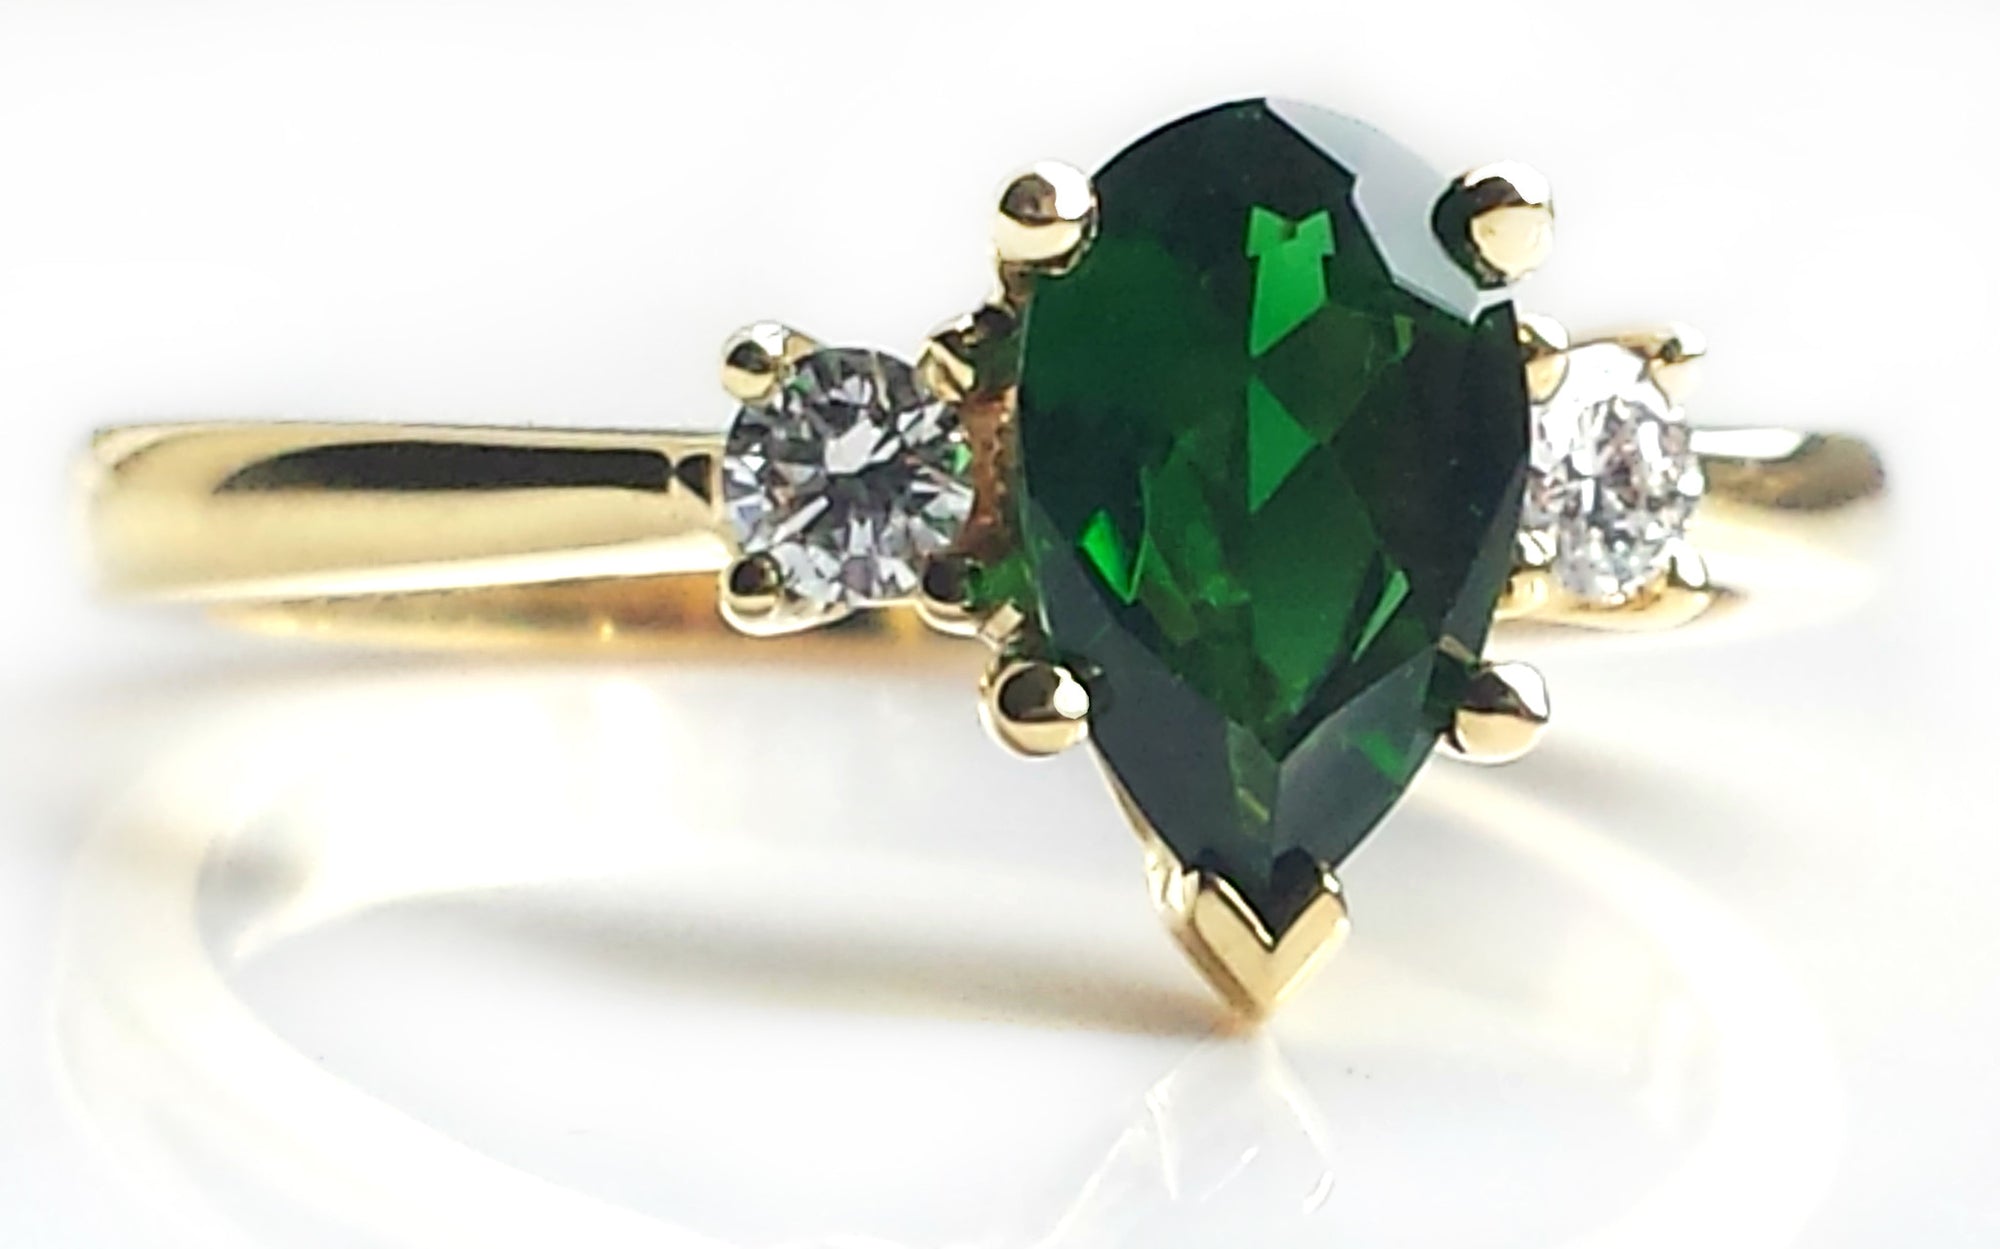 Vintage 1990s Tiffany & Co. 0.70ct Tourmaline & Diamond Ring in 18k Yellow Gold